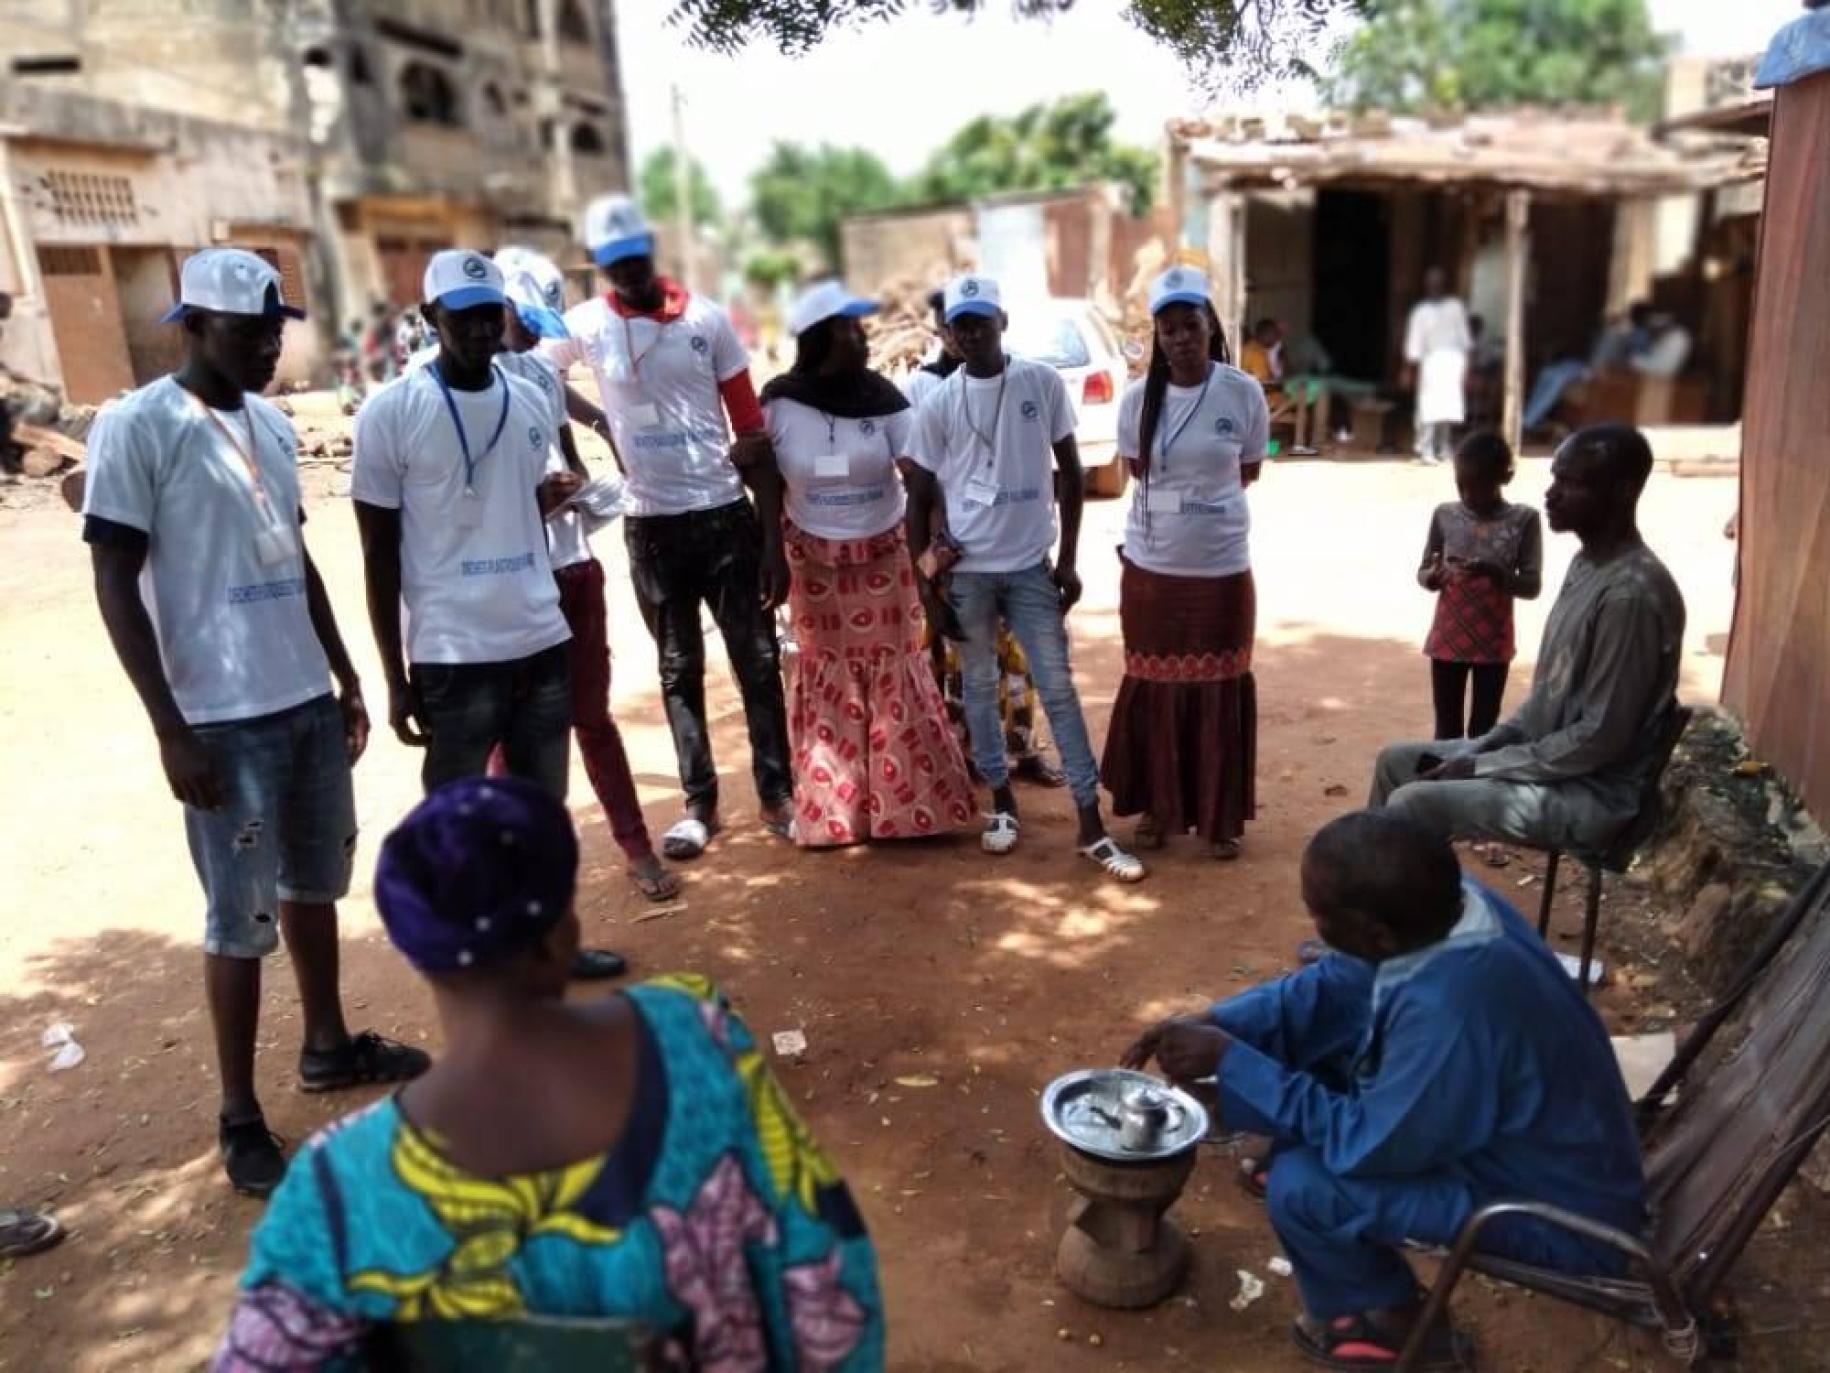 A group representing the UN meets with local communities in Mali.